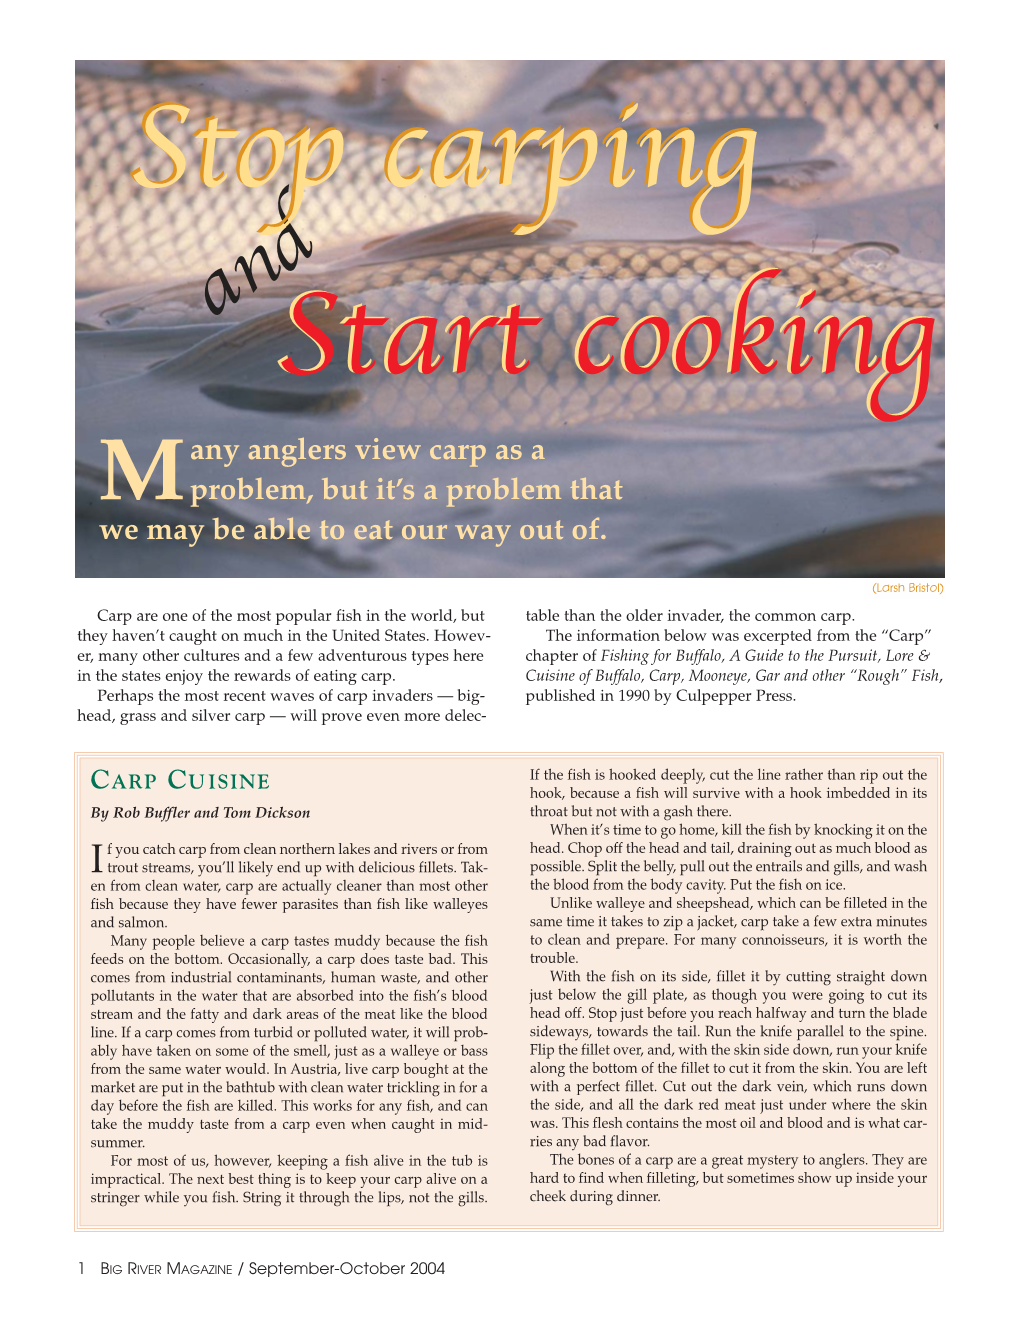 Cooking with Carp, Big River Magazine, September 2004